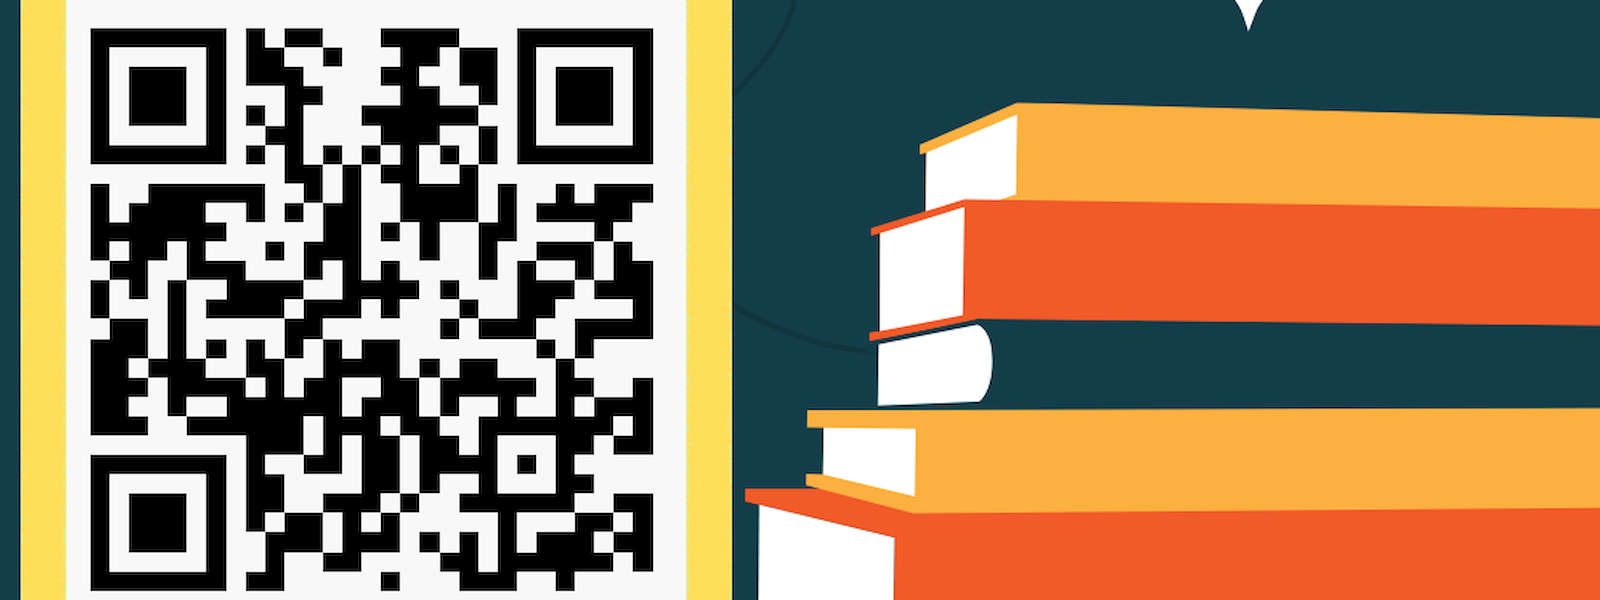 QR code and stack of books